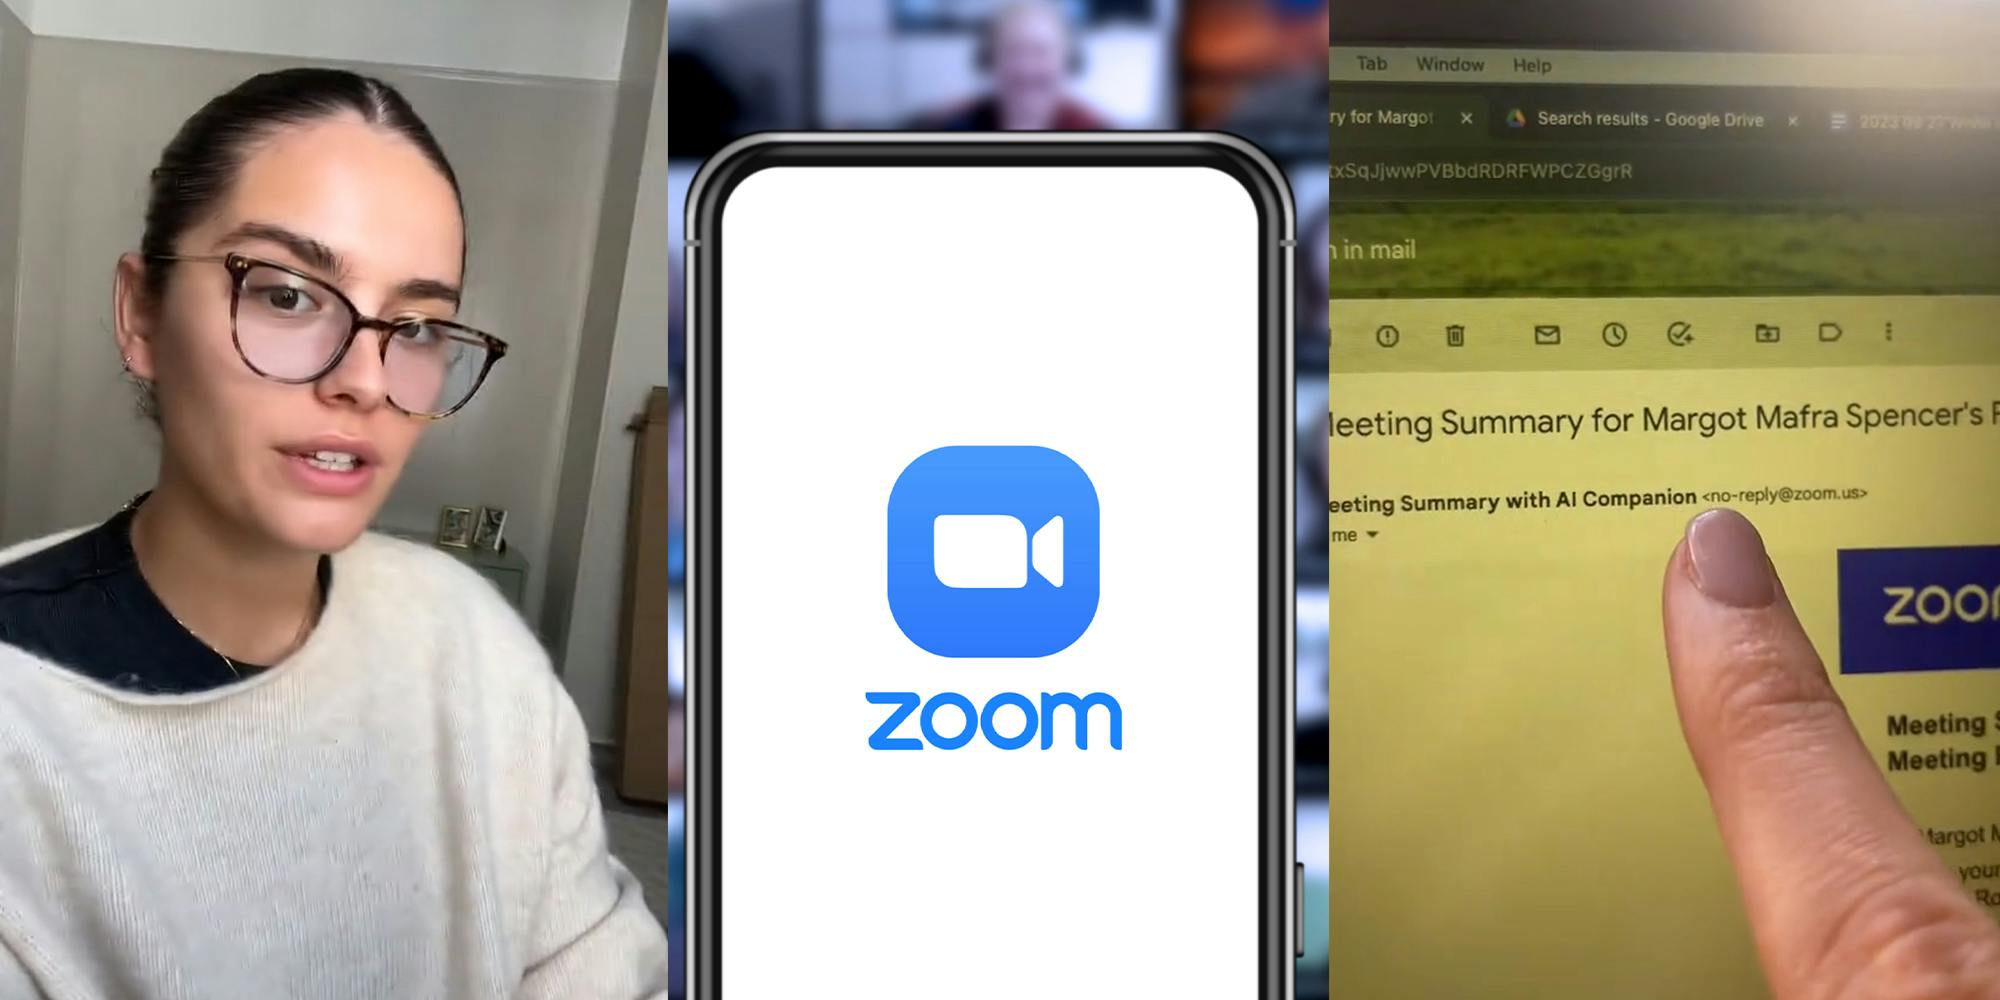 Worker says Zoom AI Companion created summary of everything she said in a meeting without her knowledge